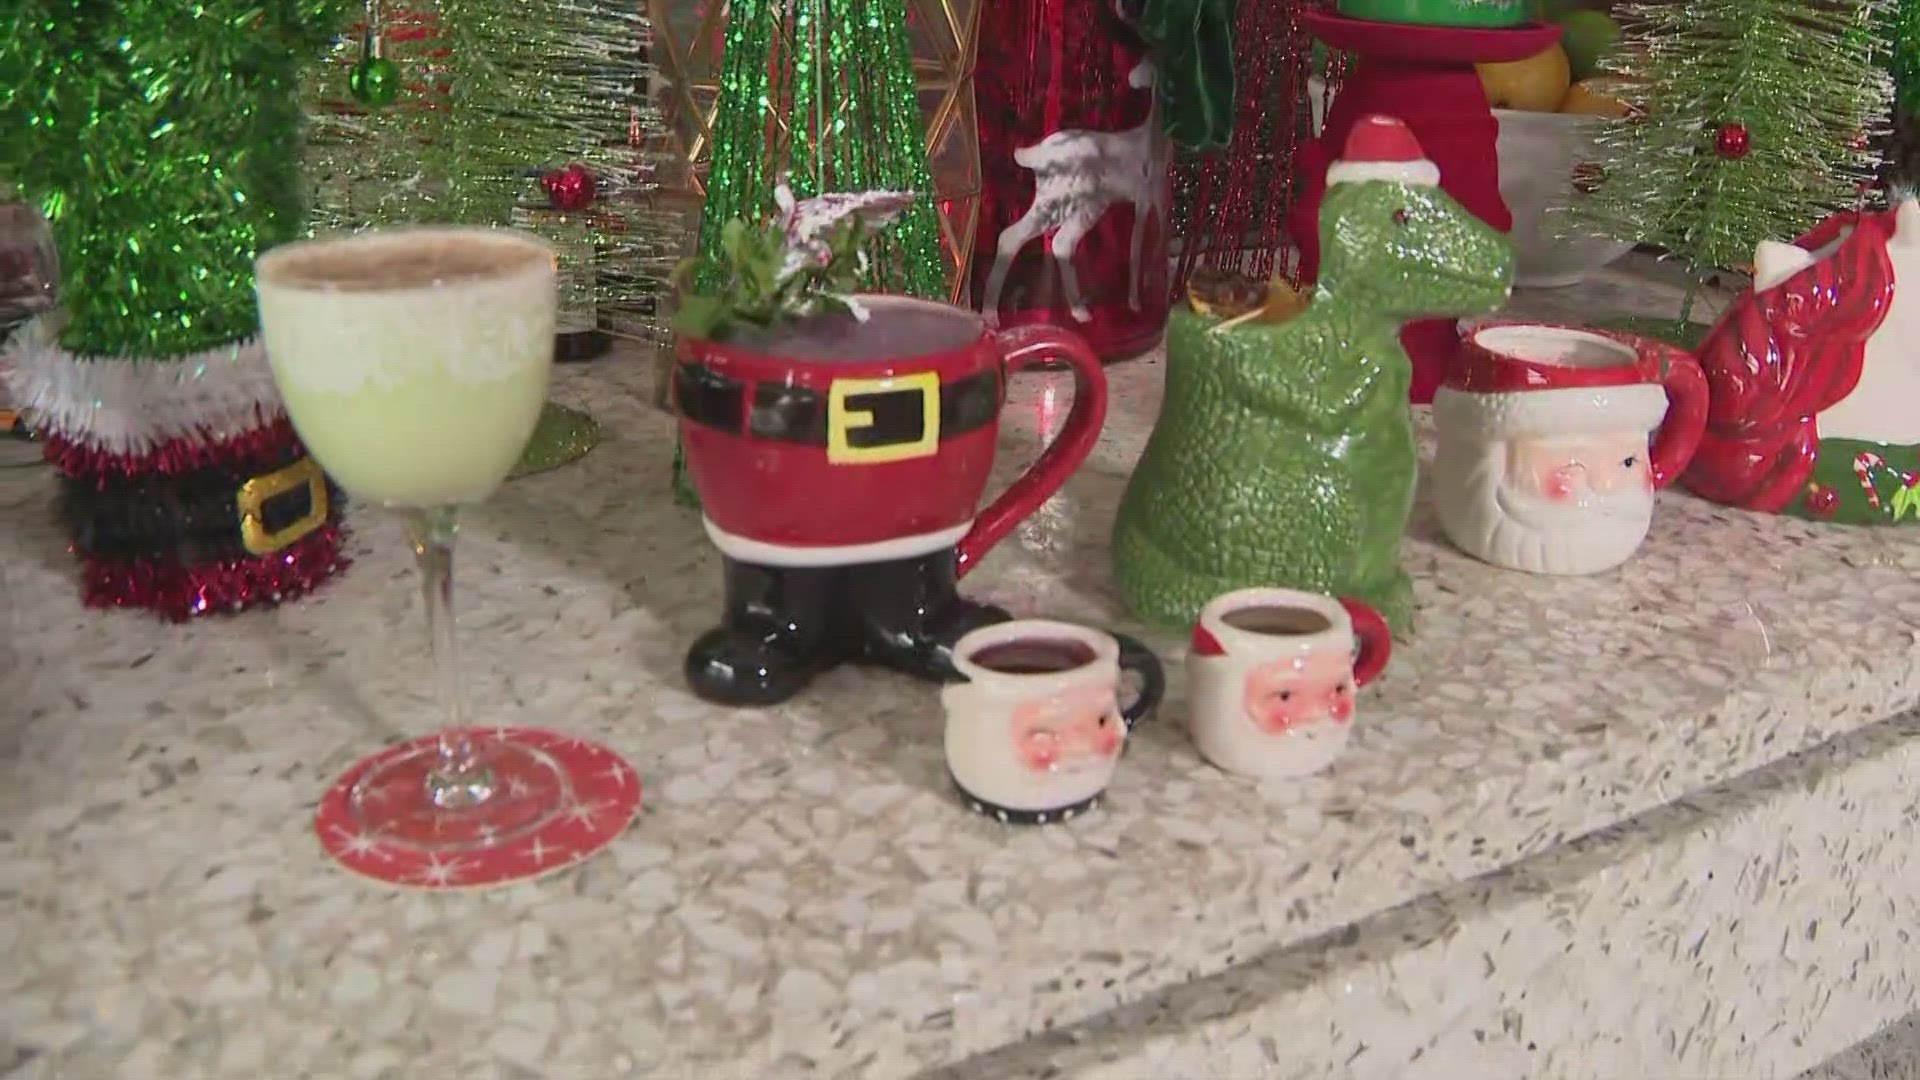 Miracle on 13 is a 90-minute Christmas cocktail experience with holiday-themed food.